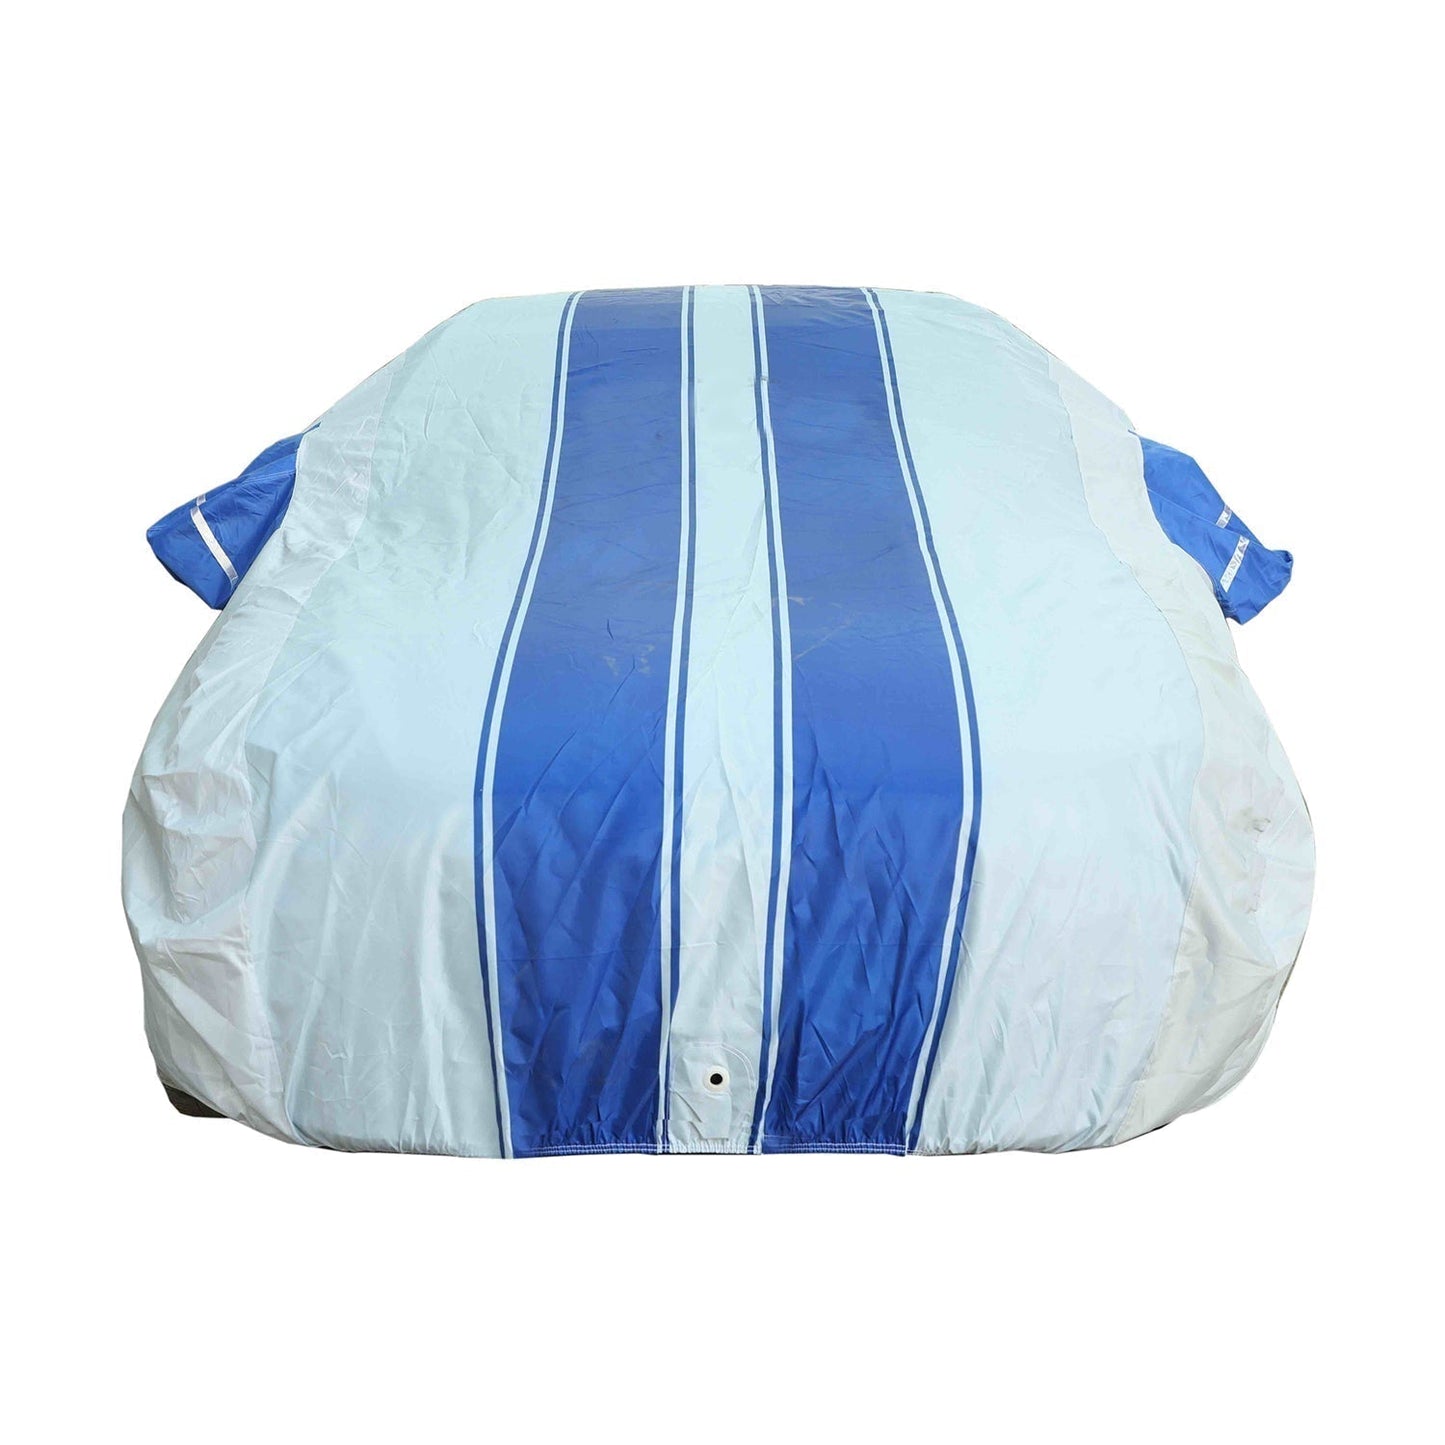 Oshotto 100% Blue dustproof and Water Resistant Car Body Cover with Mirror Pockets For Fiat Avventura